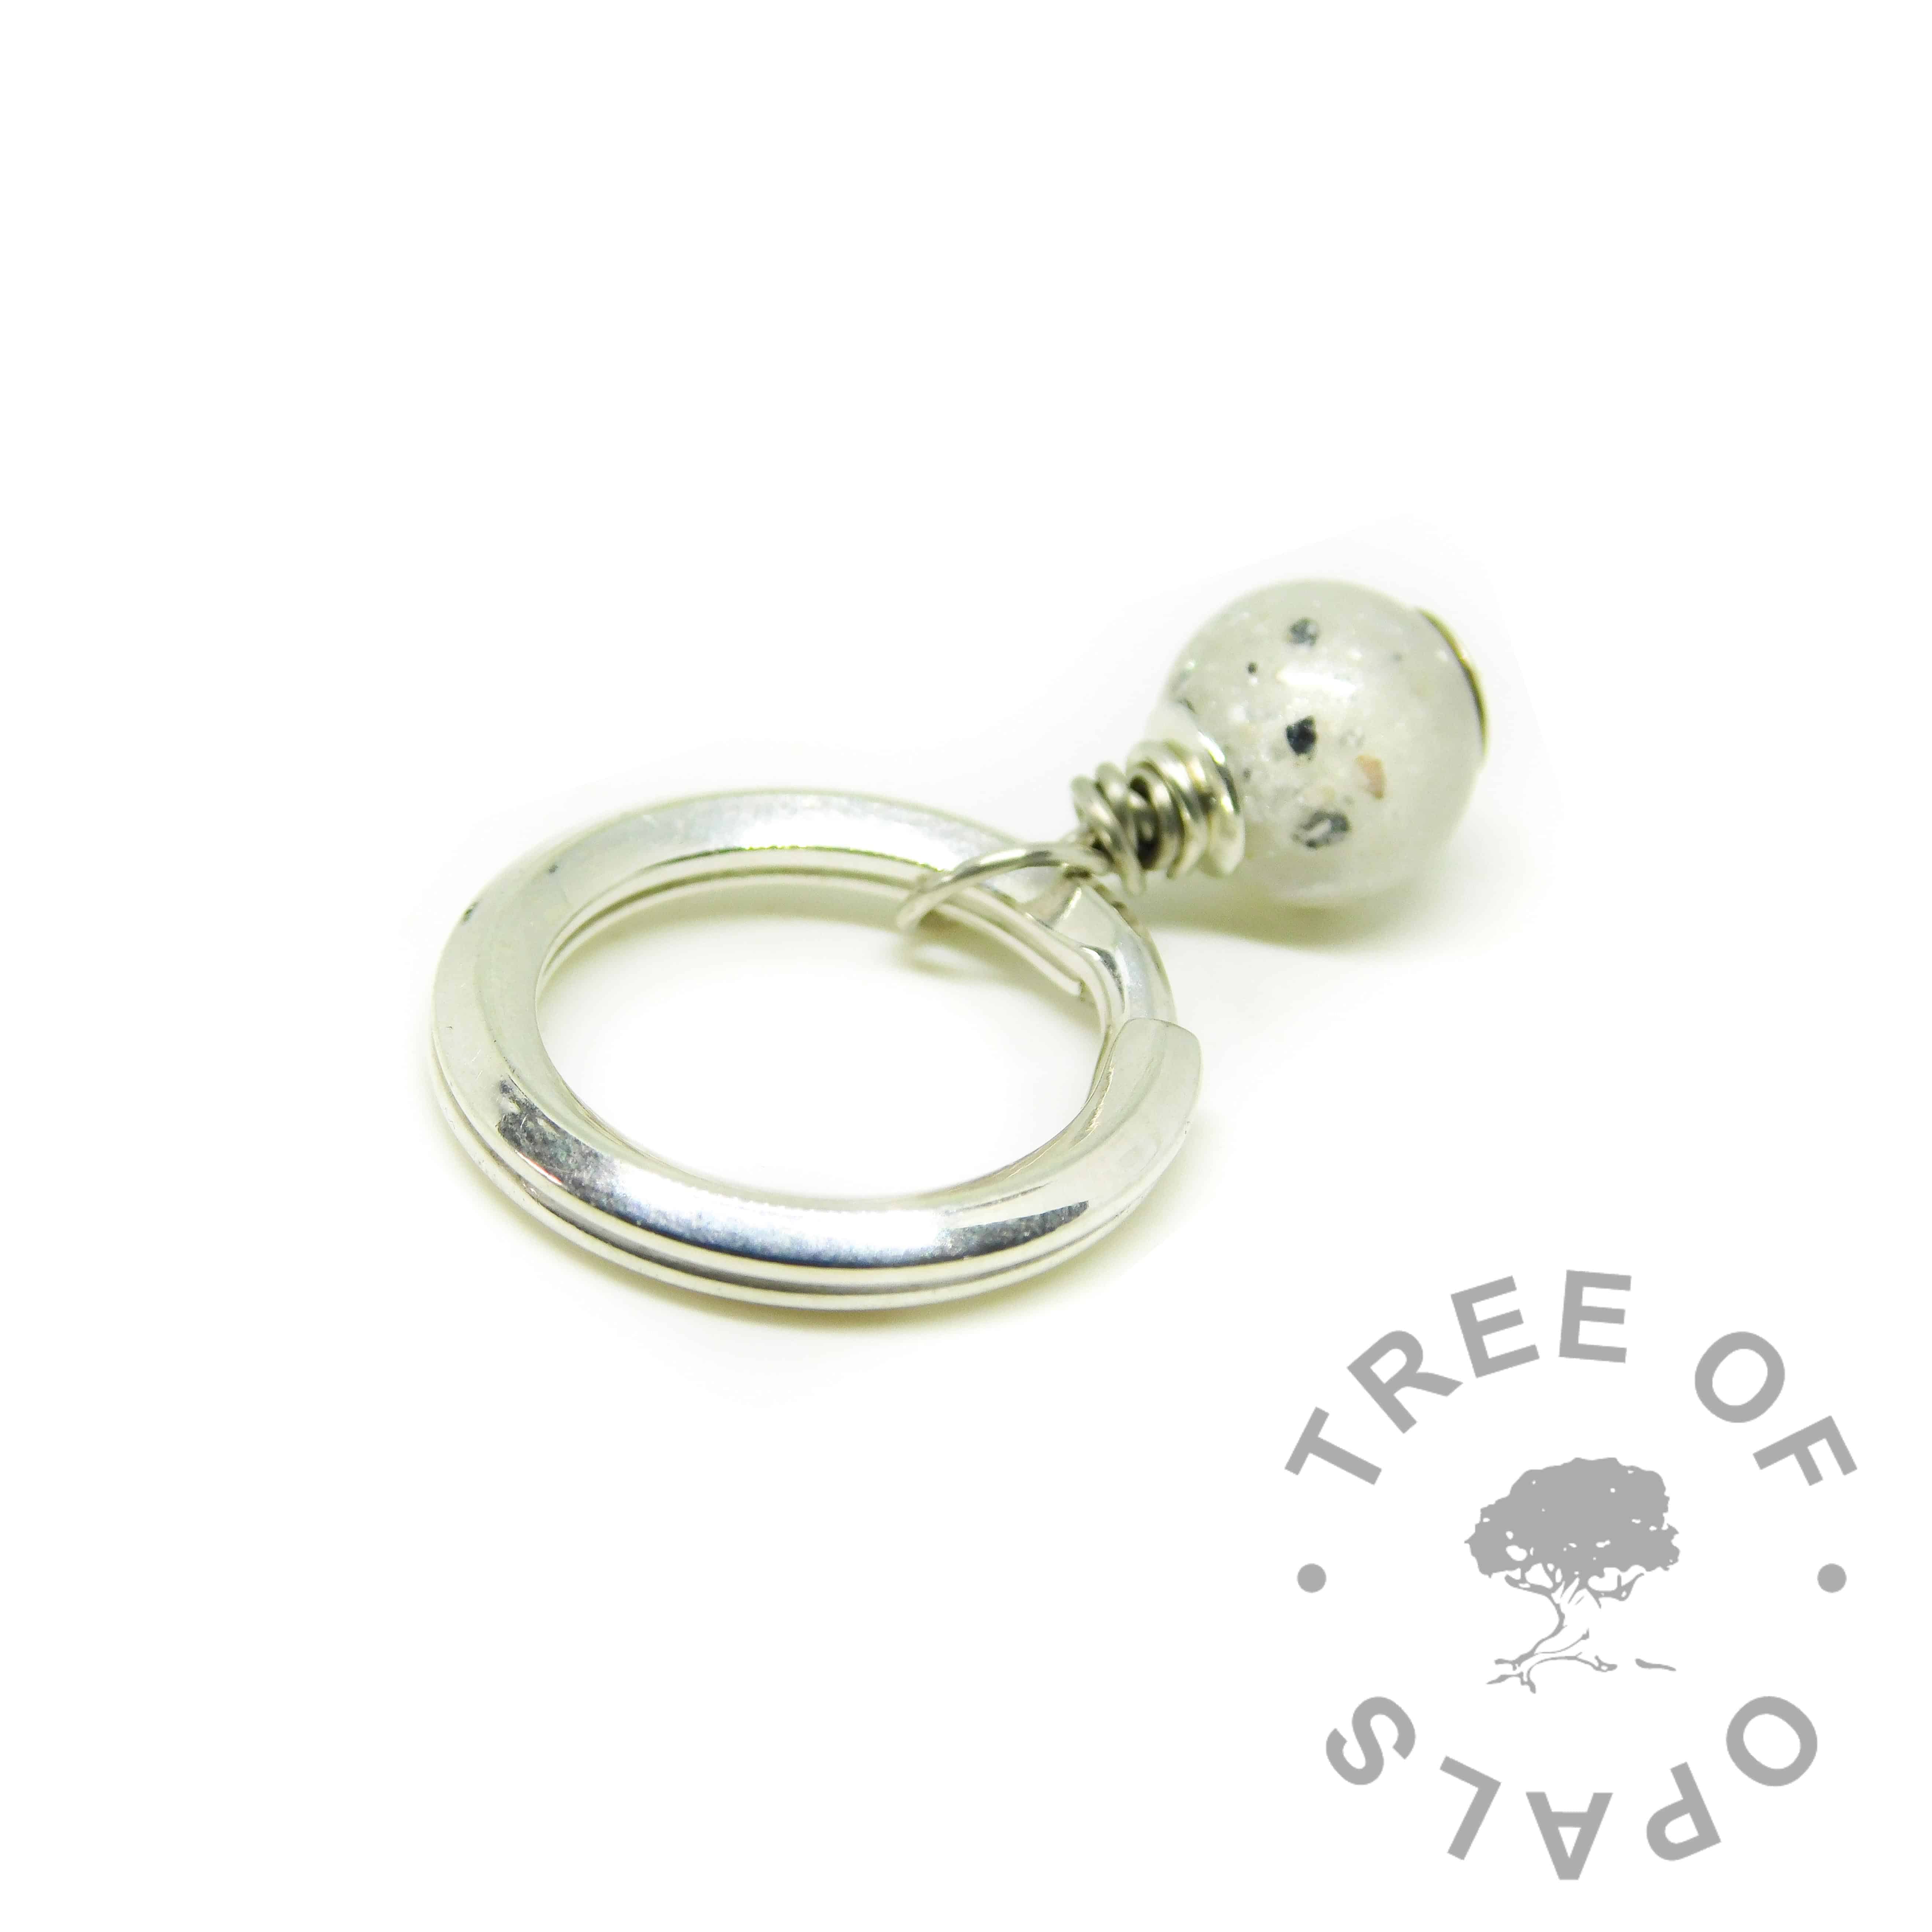 Cremation ash pearl with unicorn white resin sparkle mix. Set on a heavy solid sterling silver split ring keyring setting